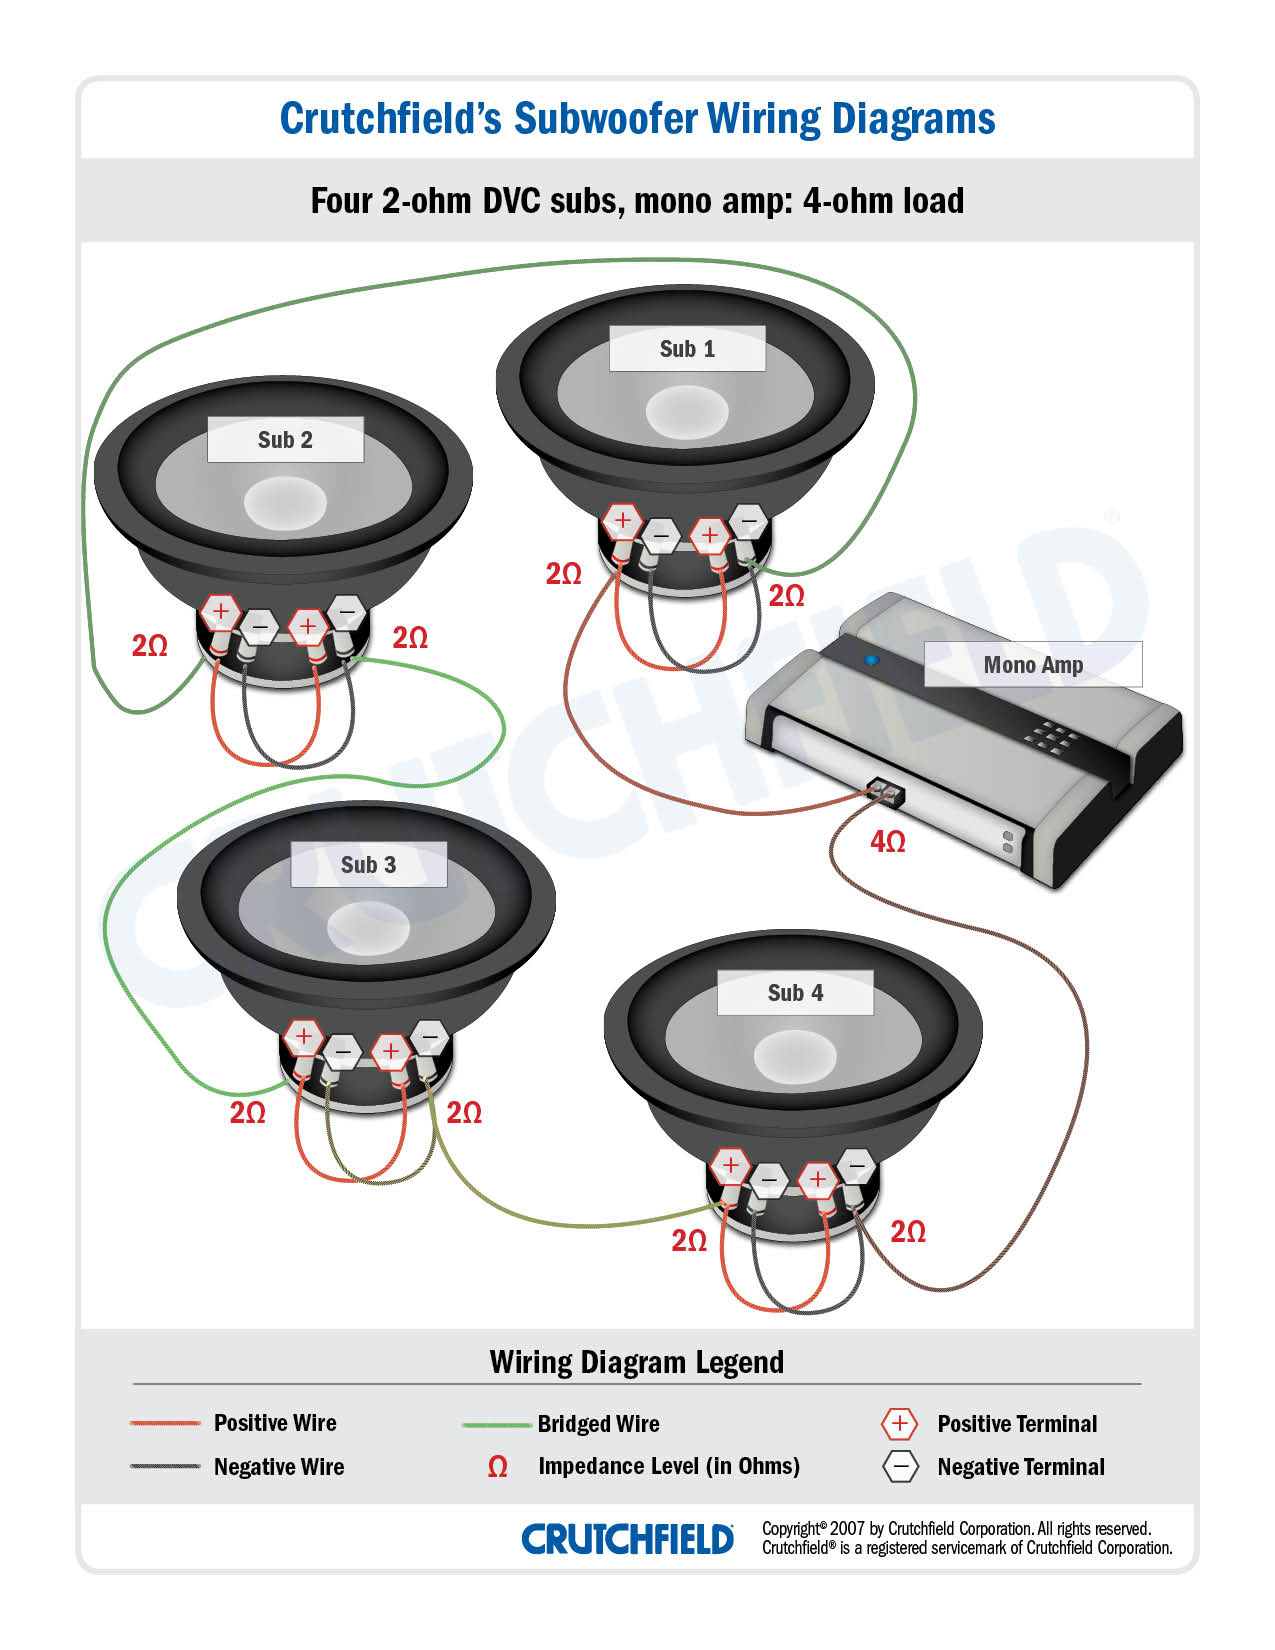 Subwoofer Wiring Diagrams — How To Wire Your Subs - Speaker Wiring Diagram